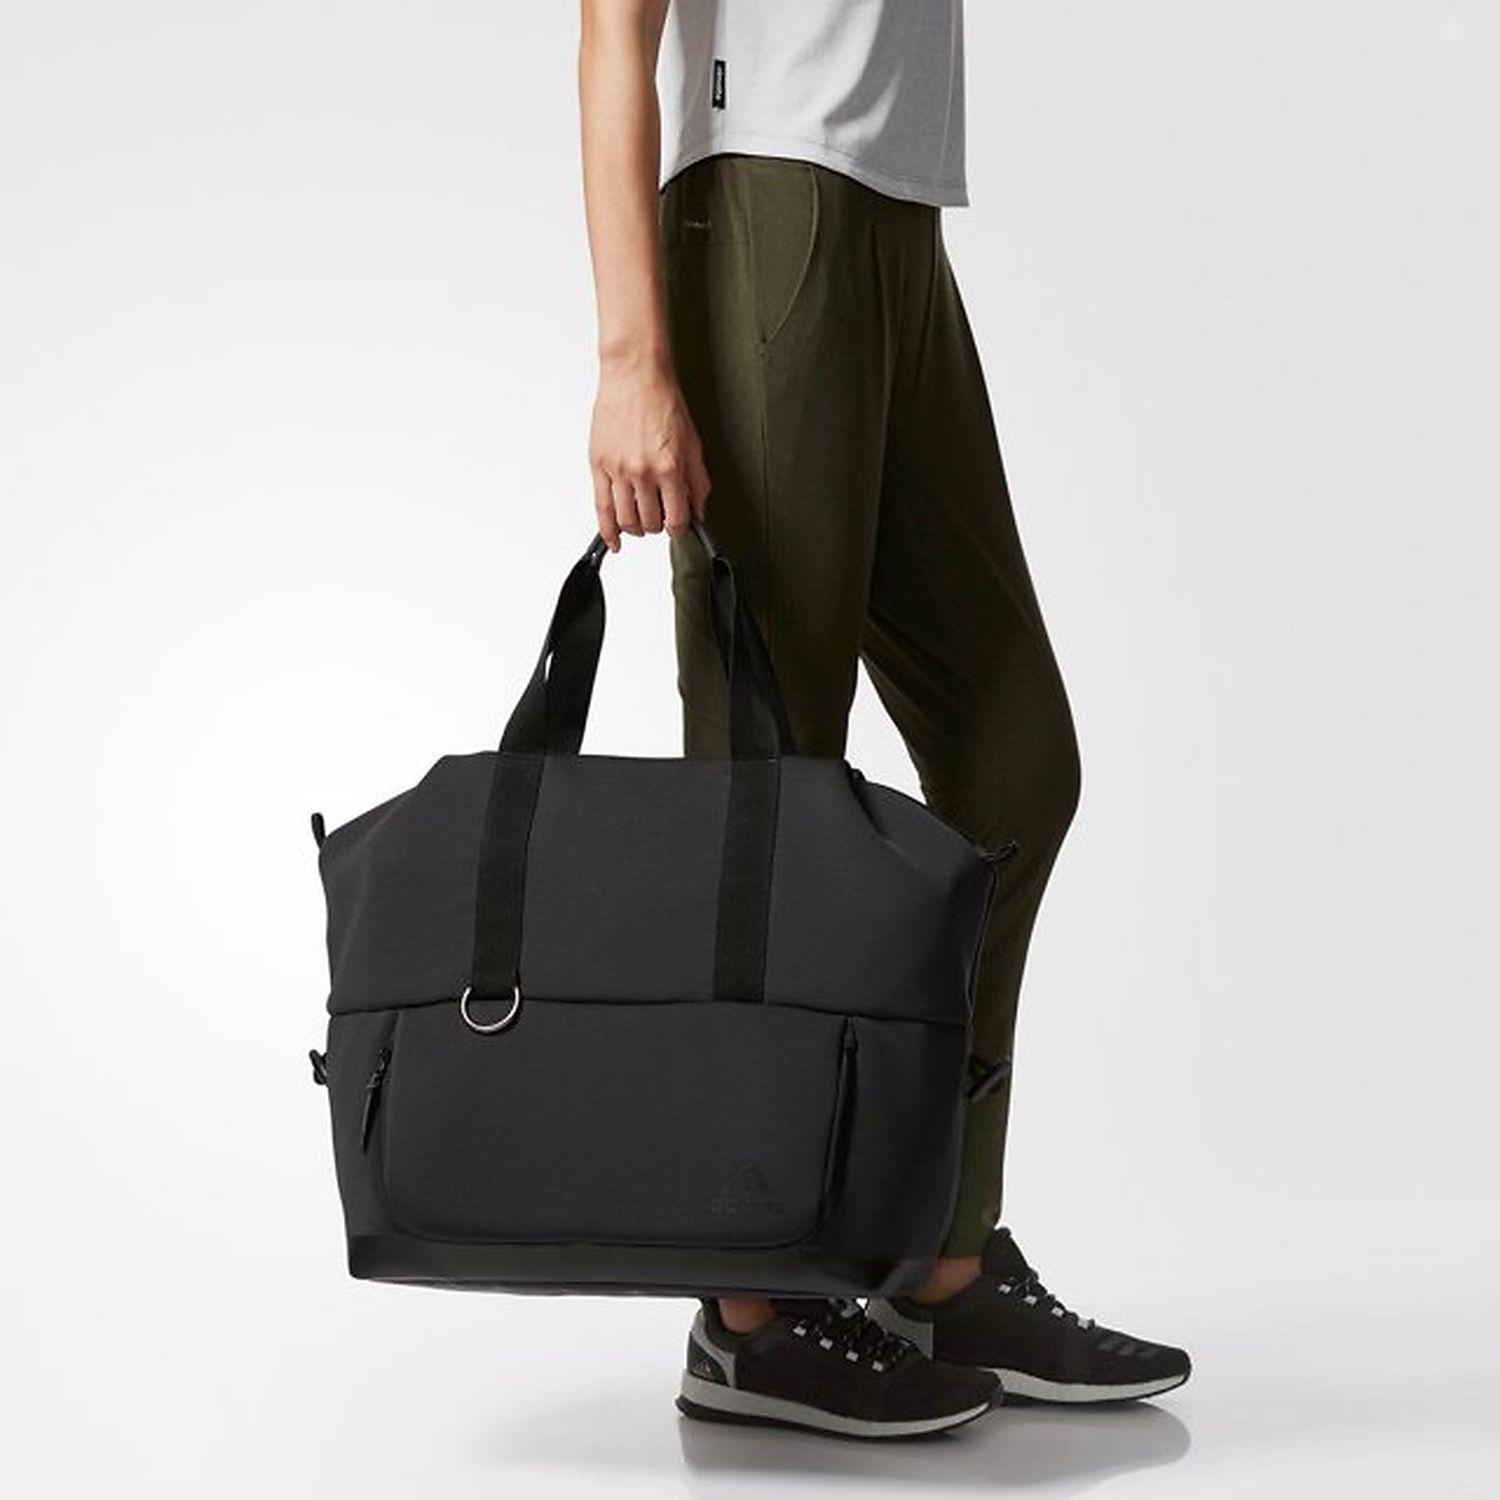 adidas favourite convertible tote